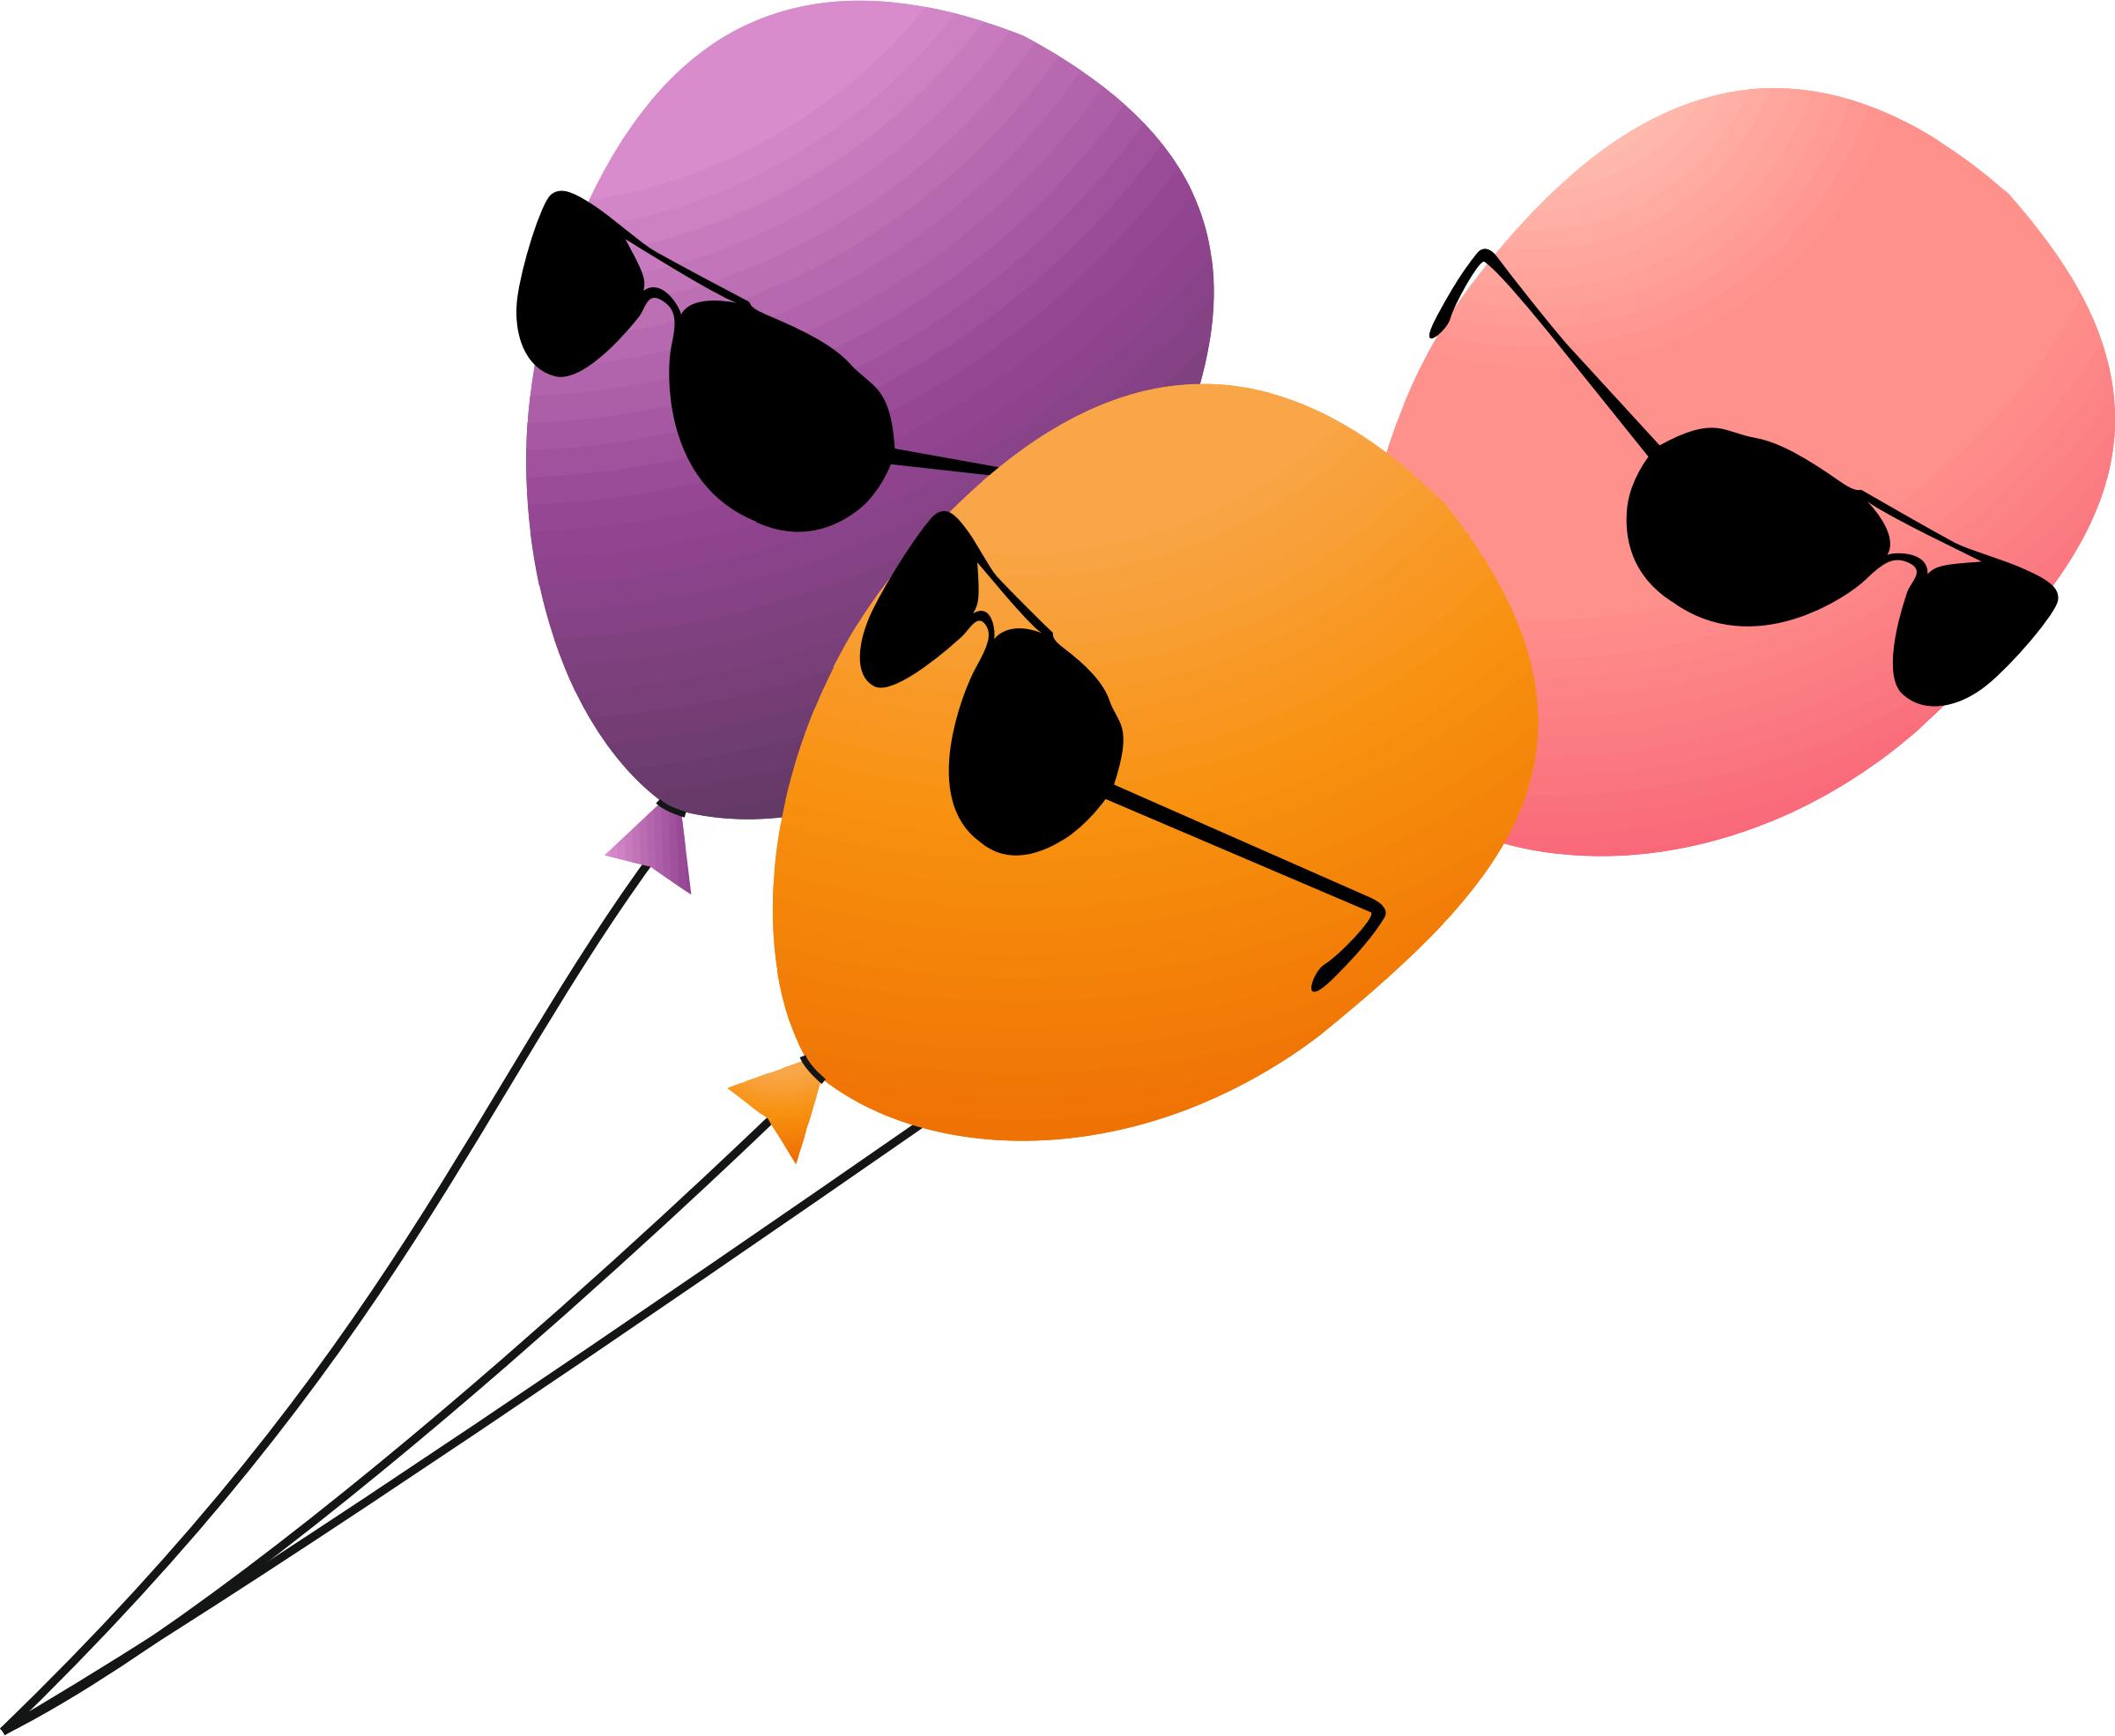 Funny serious balloons PNG icons